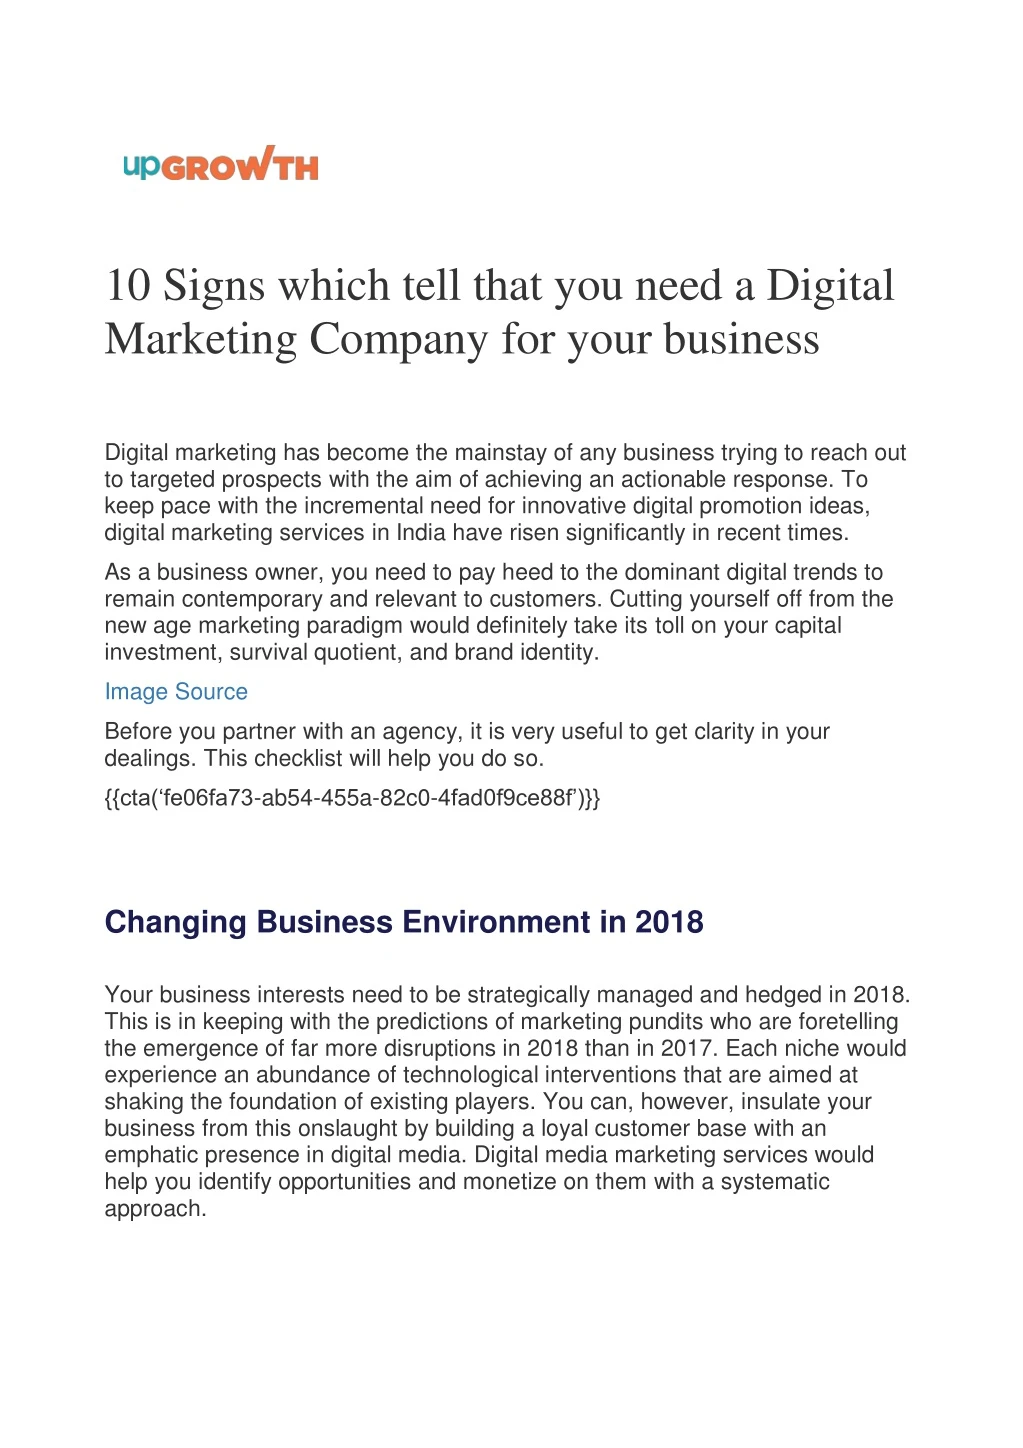 10 signs which tell that you need a digital